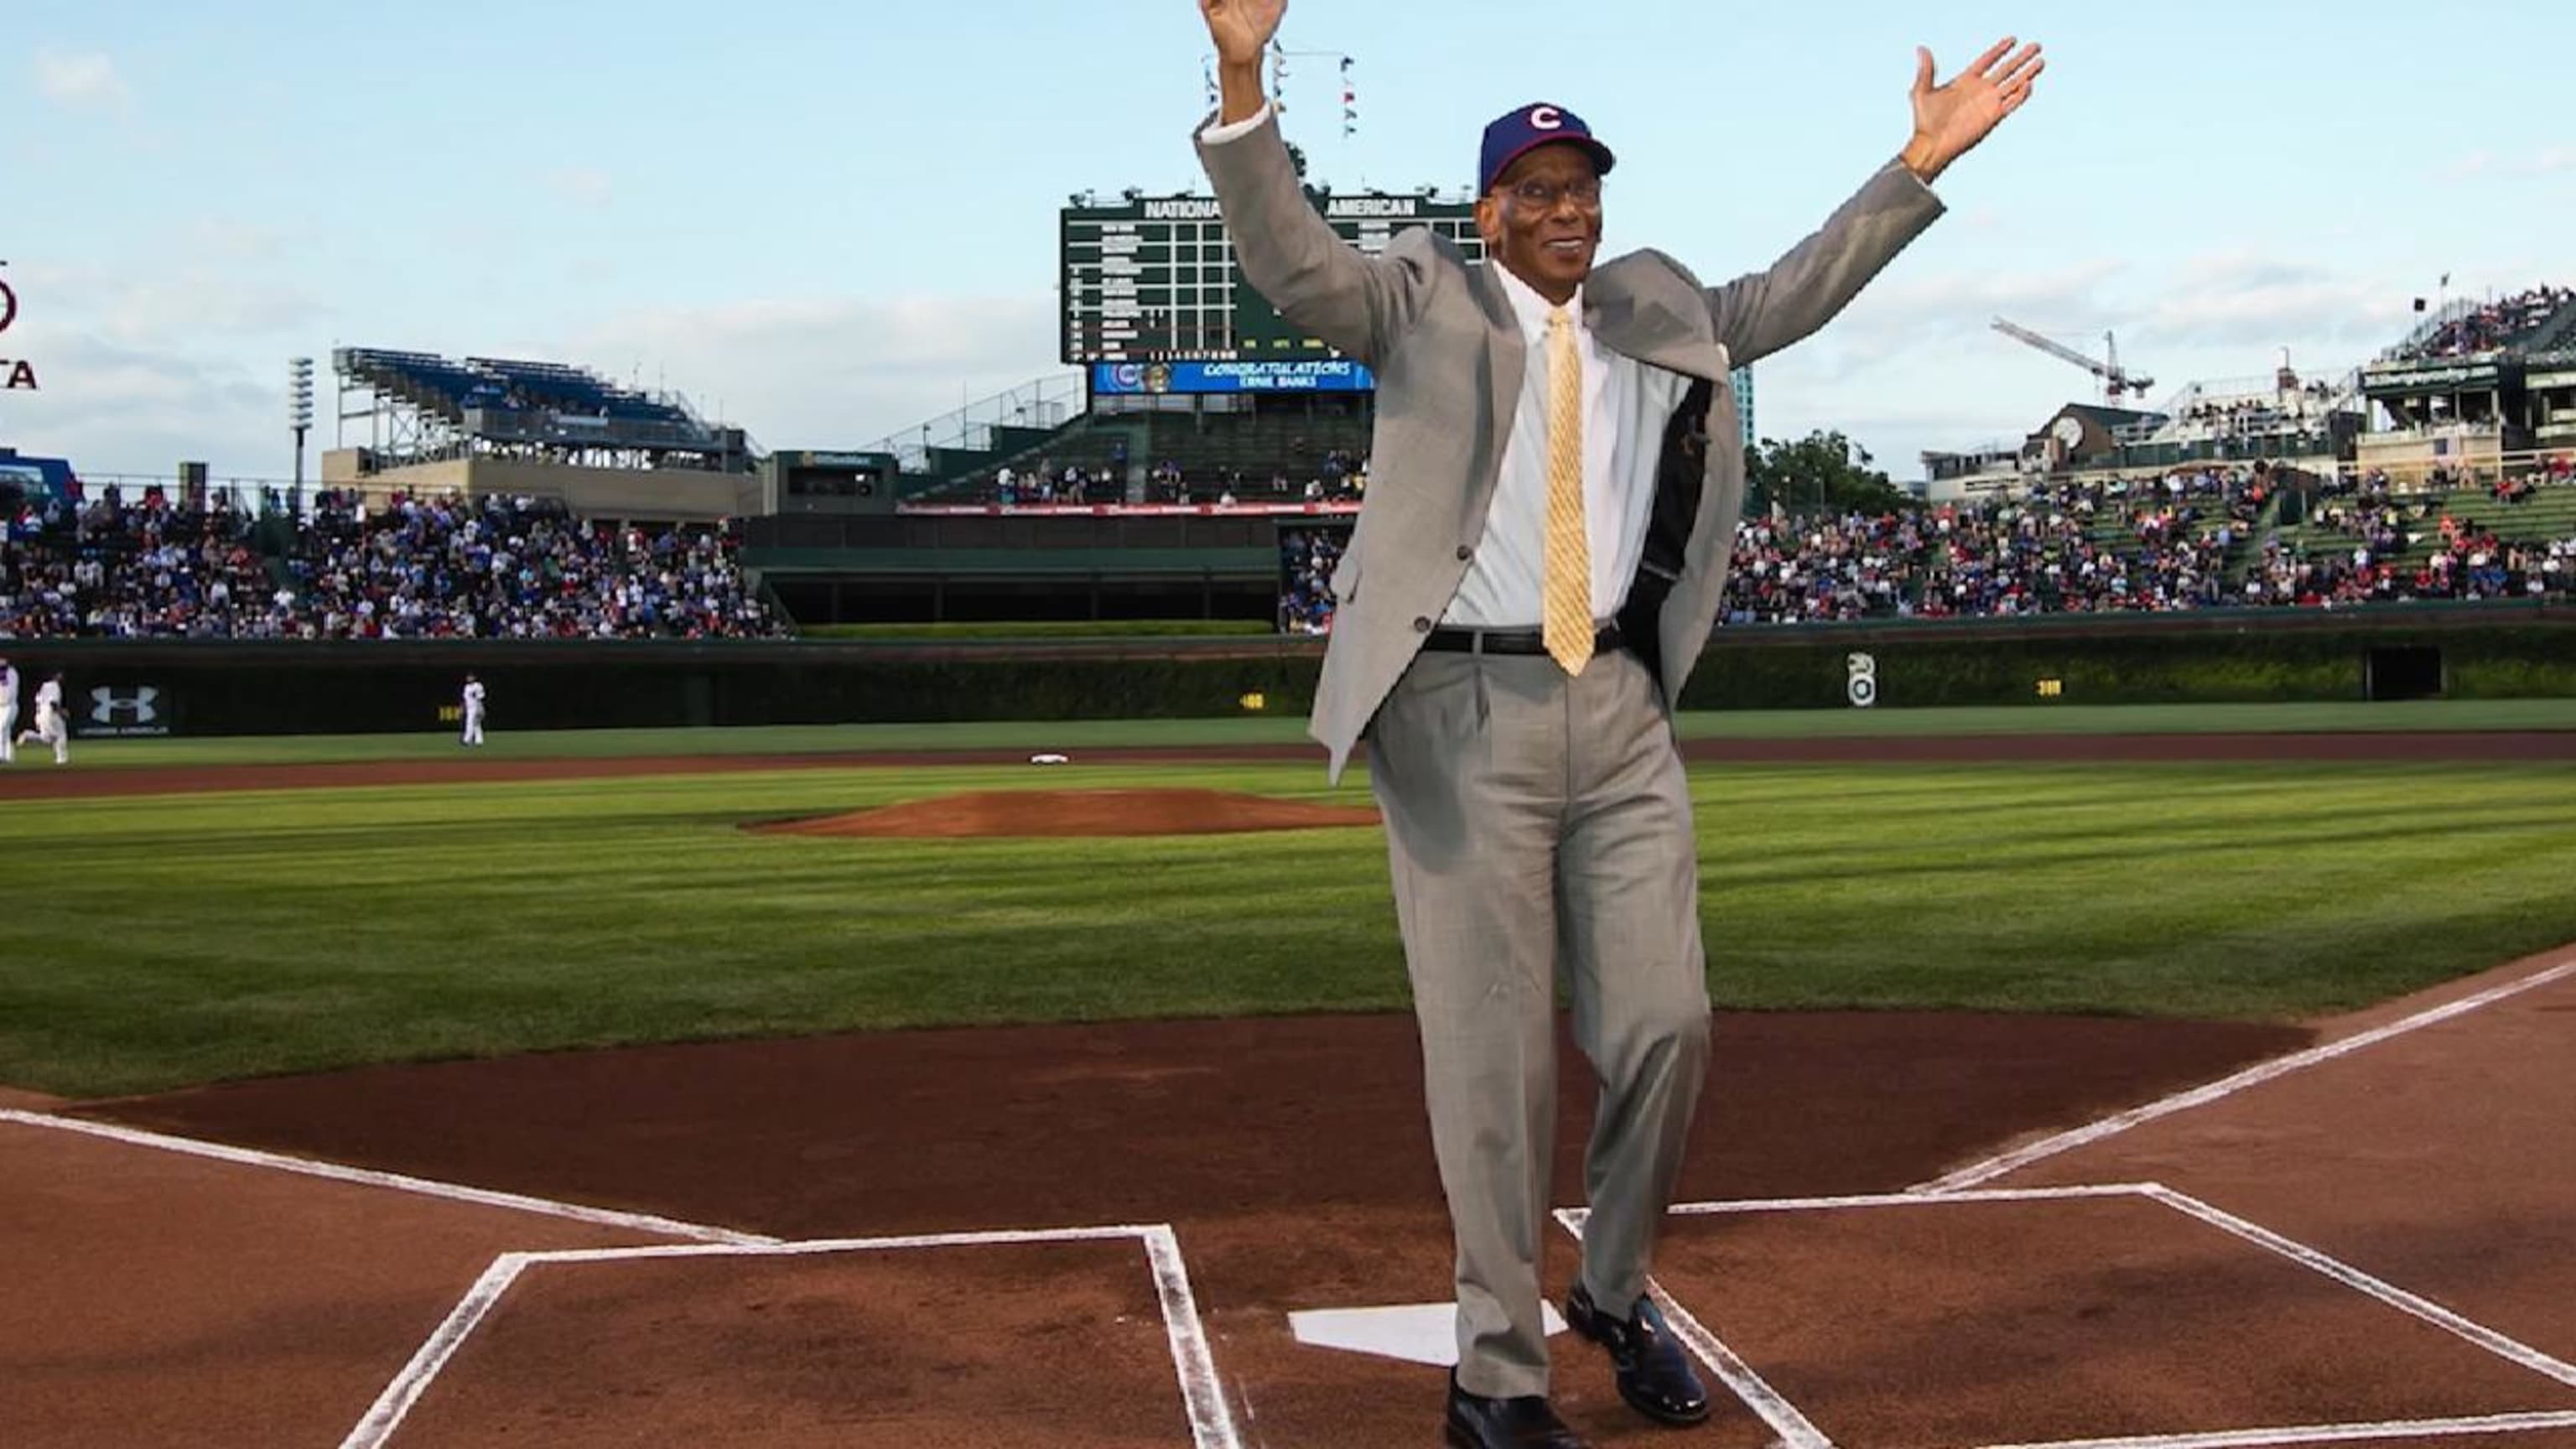 Chicago Cubs History: Ernie Banks debuts at Wrigley Field